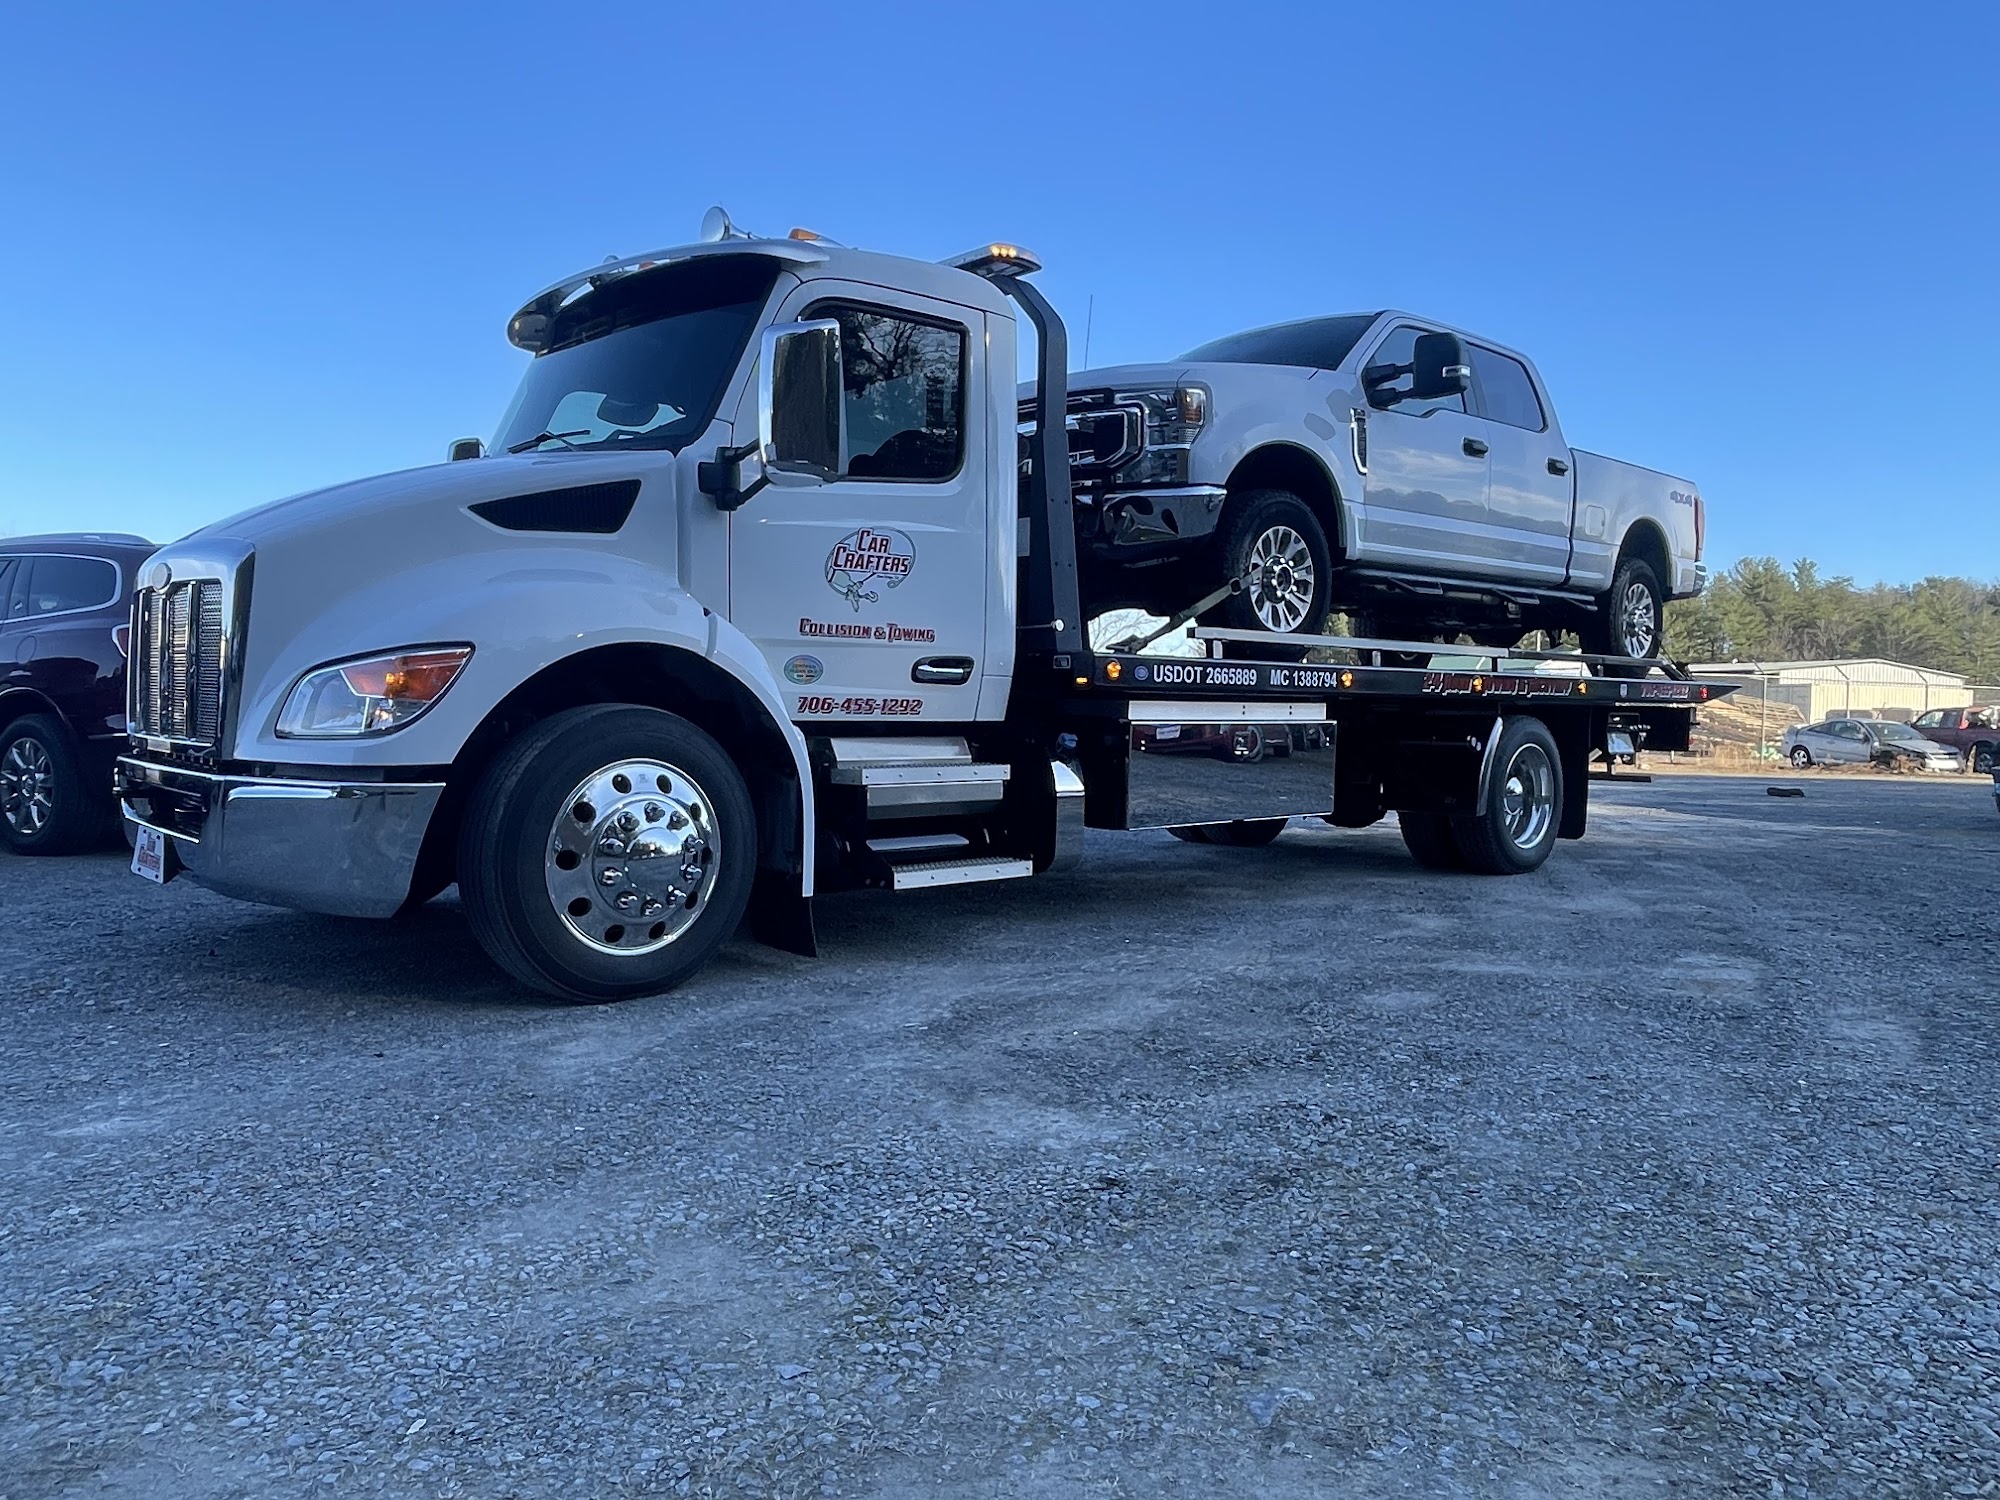 Car Crafters Towing